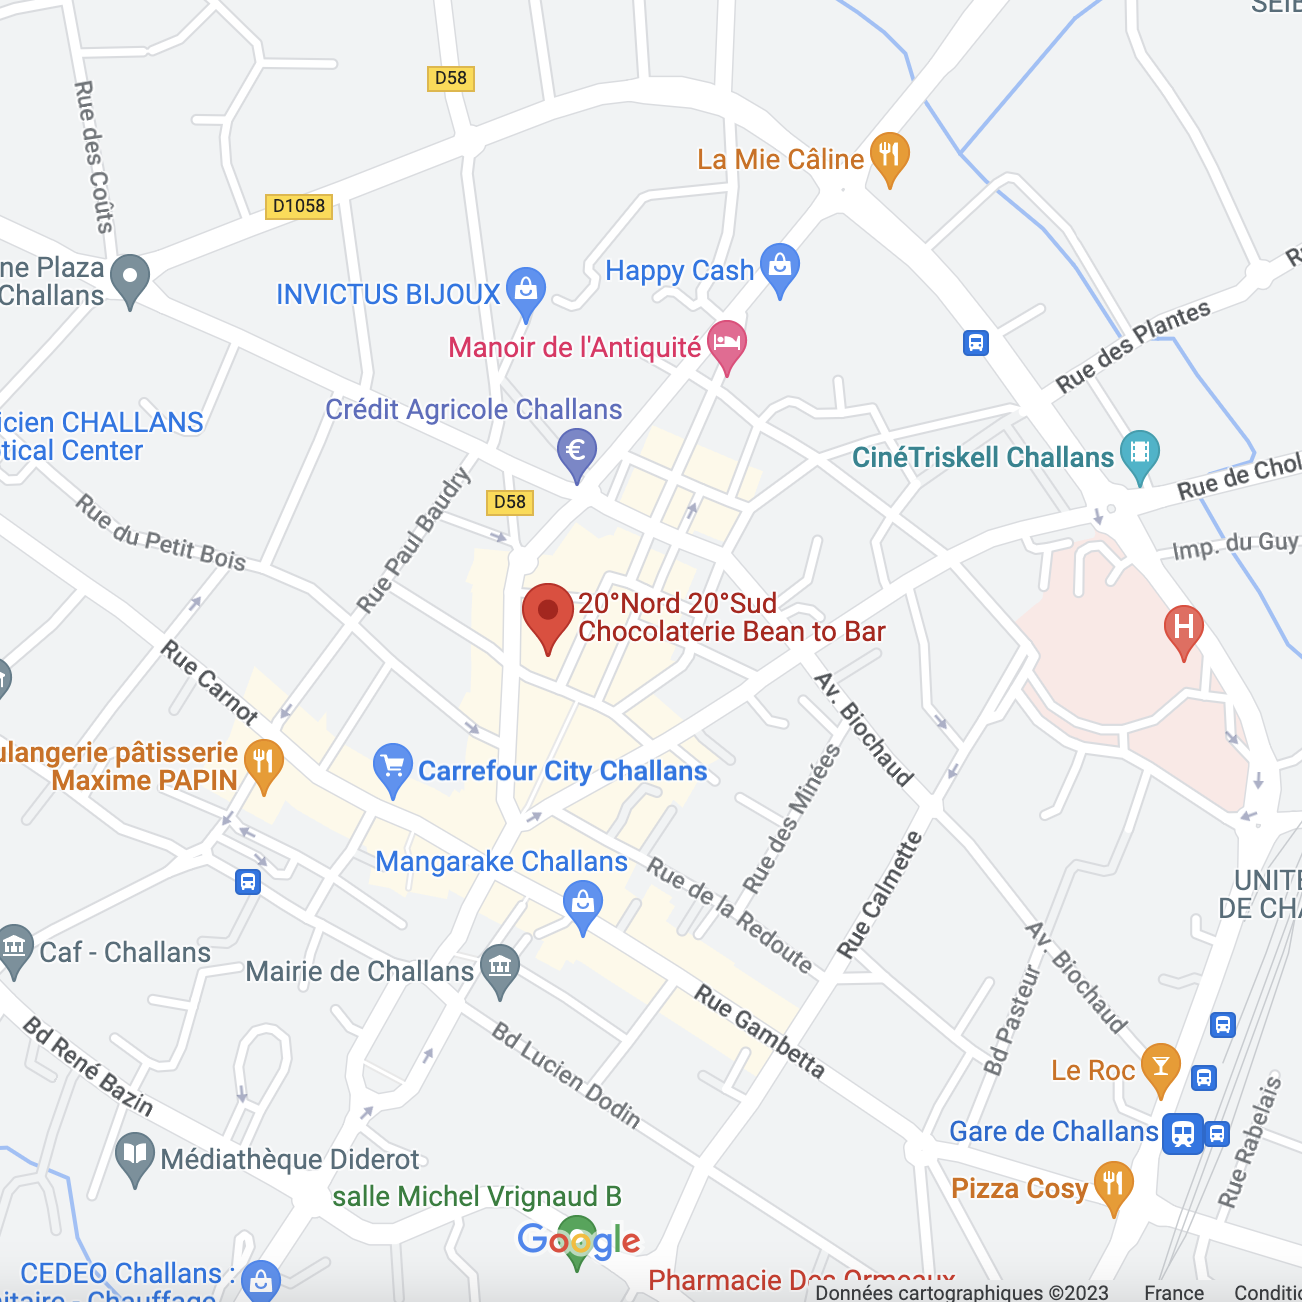 Google Map chocolaterie Challans 20Nord 20Sud